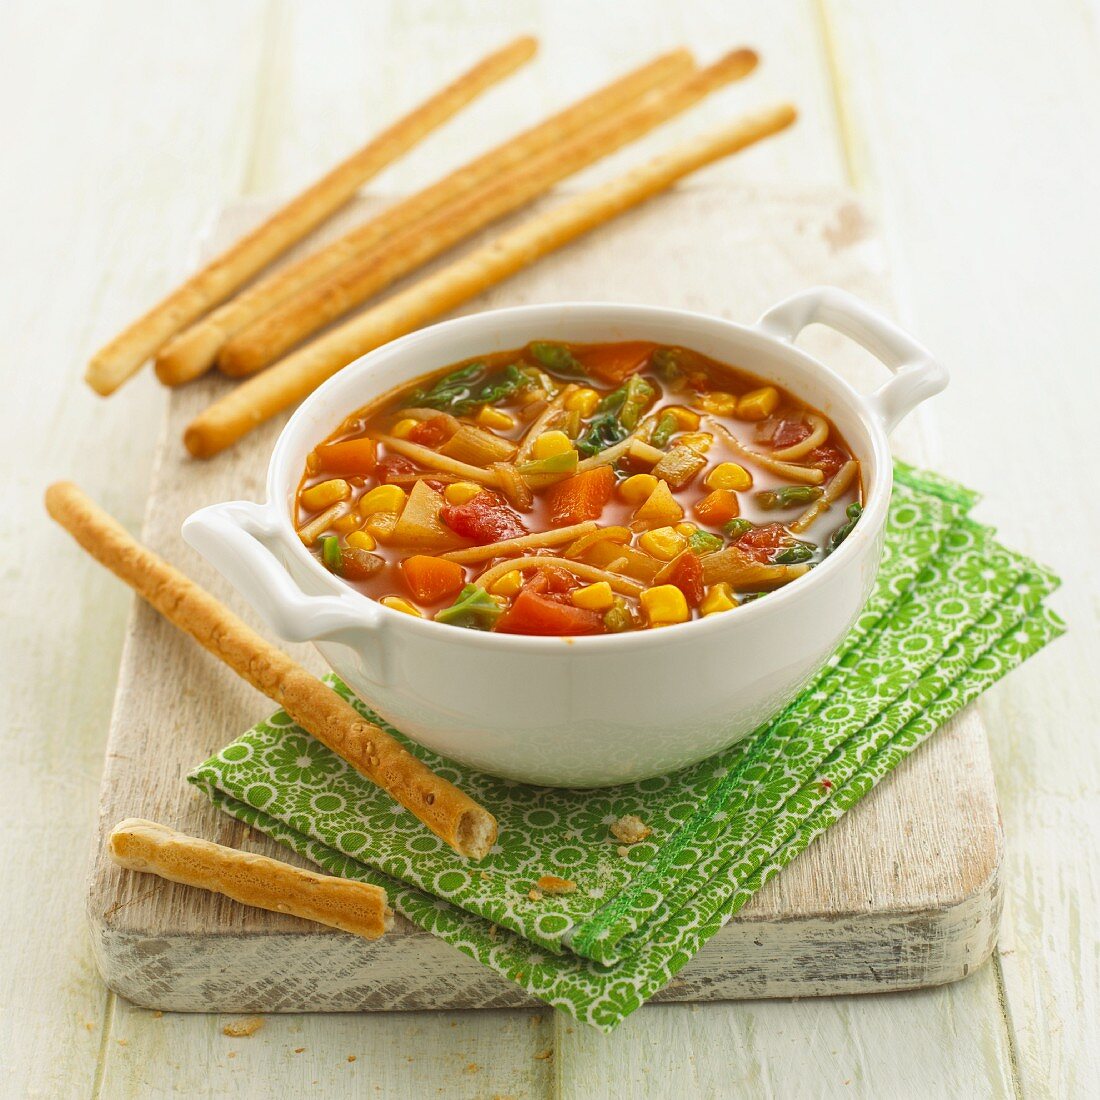 Vegetable stew with pasta and breadsticks